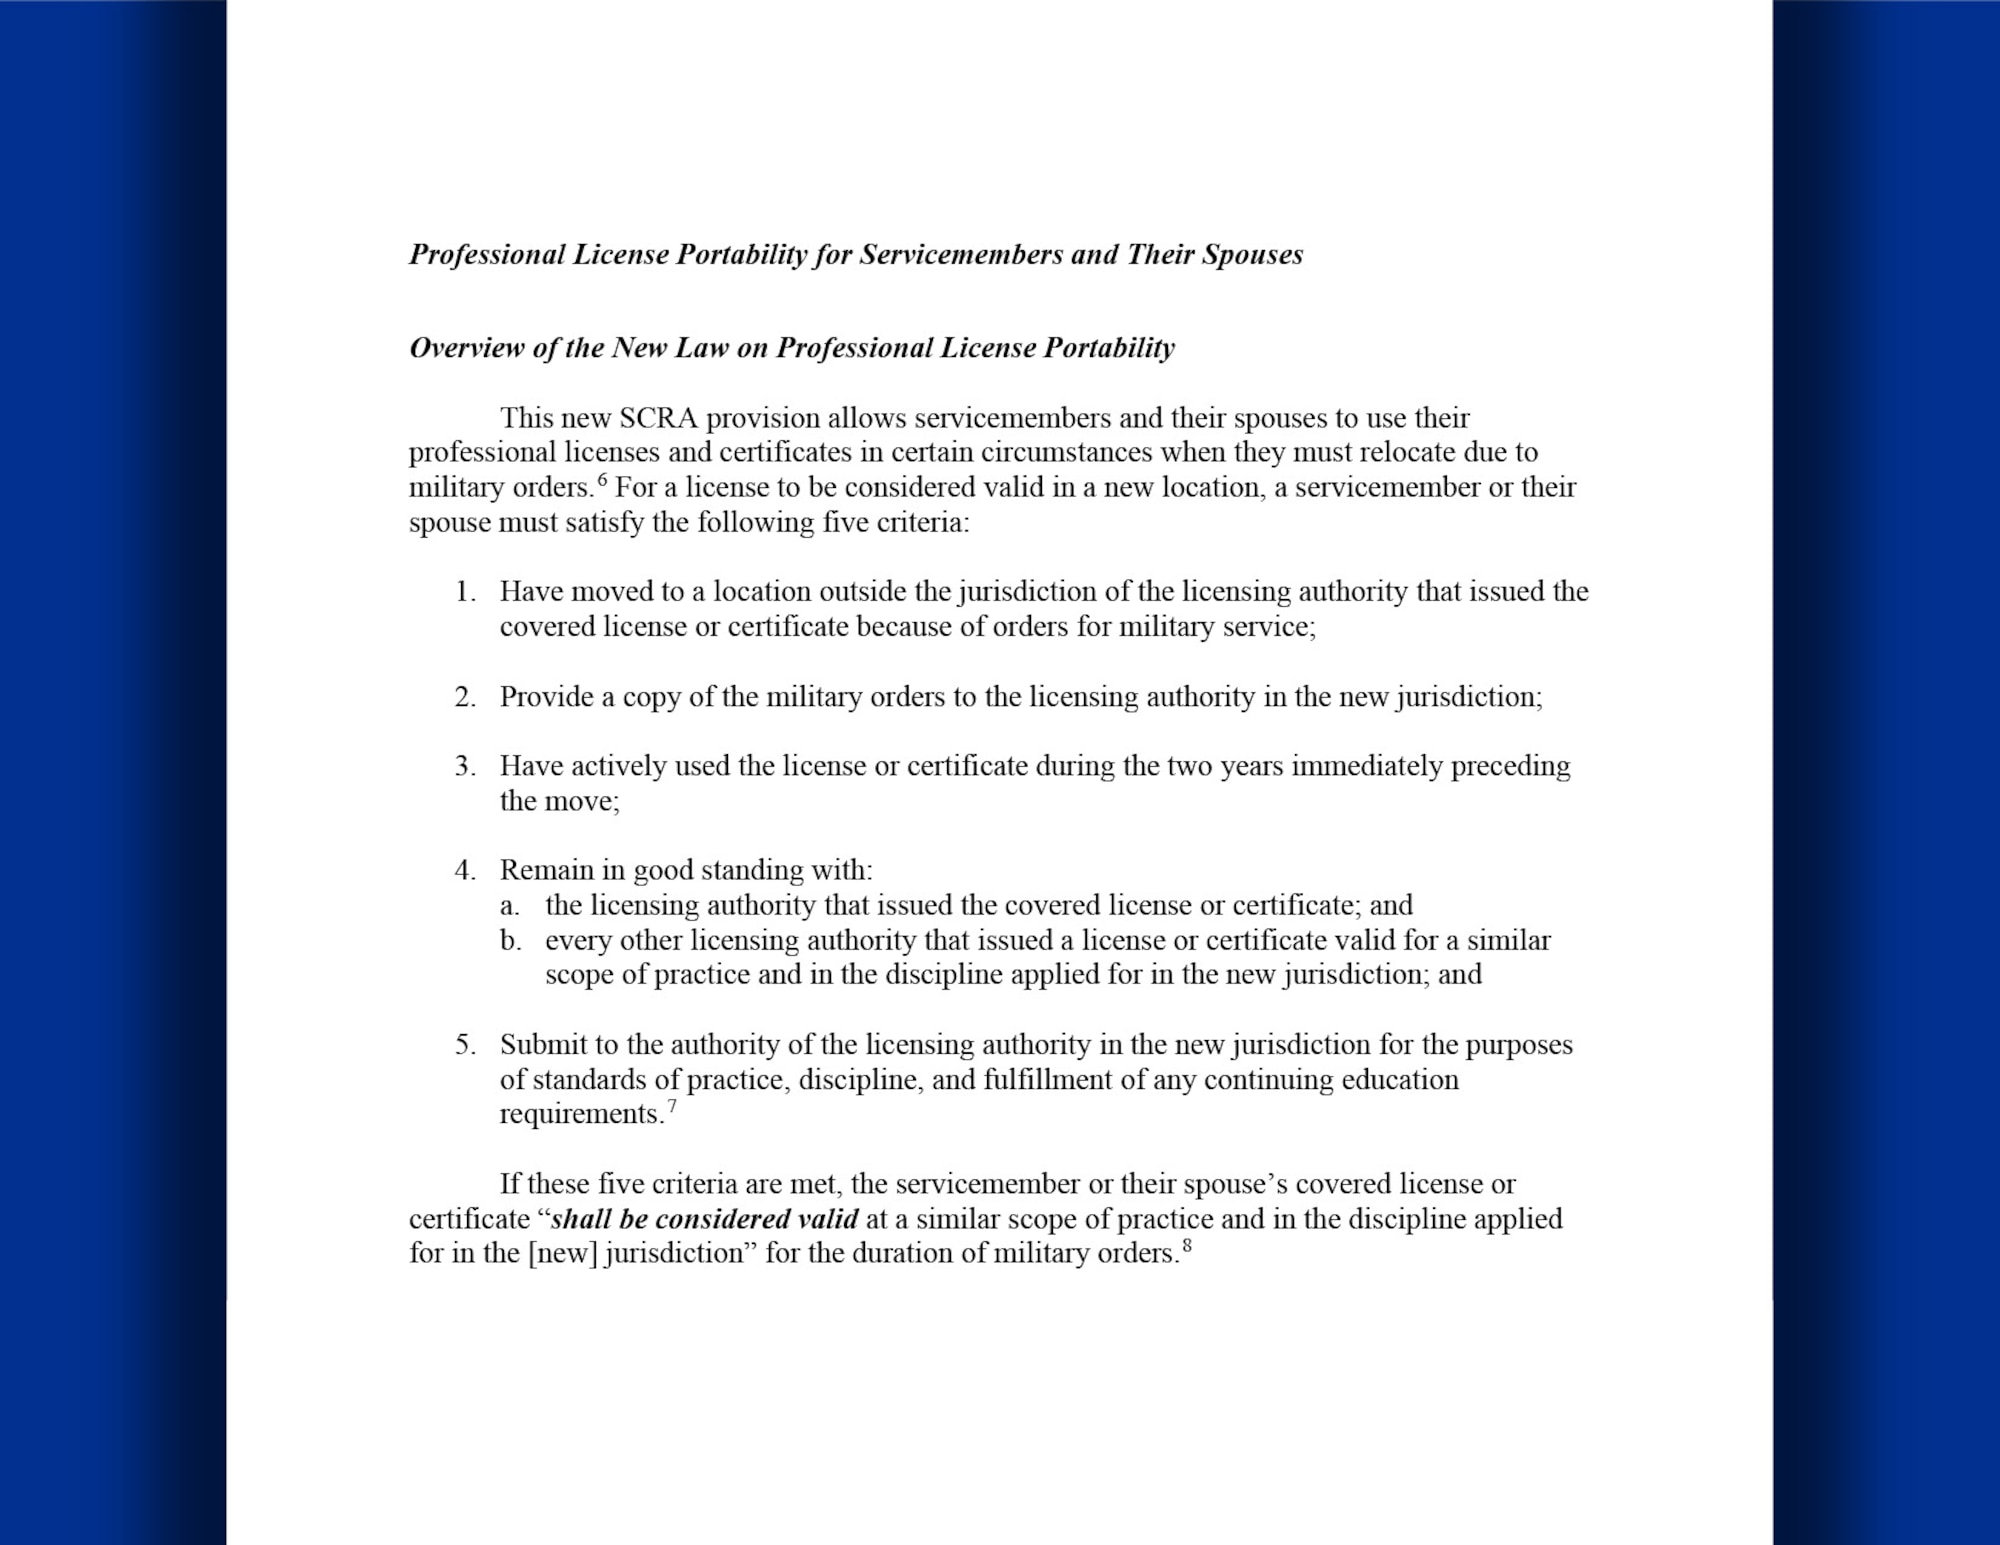 A graphic showing verbiage from the second page of a letter from the U.S. Justice Department notifying State Licensing Authorities on July 14, 2023, of a new provision in the Servicemembers Civil Relief Act about the portability of professional licenses for servicemembers and their spouses. The letter informs state licensing authorities about Congress’s recent amendment to the SCRA that allows servicemembers and their spouses to use their professional licenses or certificates in new jurisdictions if they are relocating because of military orders and meet certain other requirements. (U.S. Air Force graphic by Staff Sgt. Shelby Thurman)